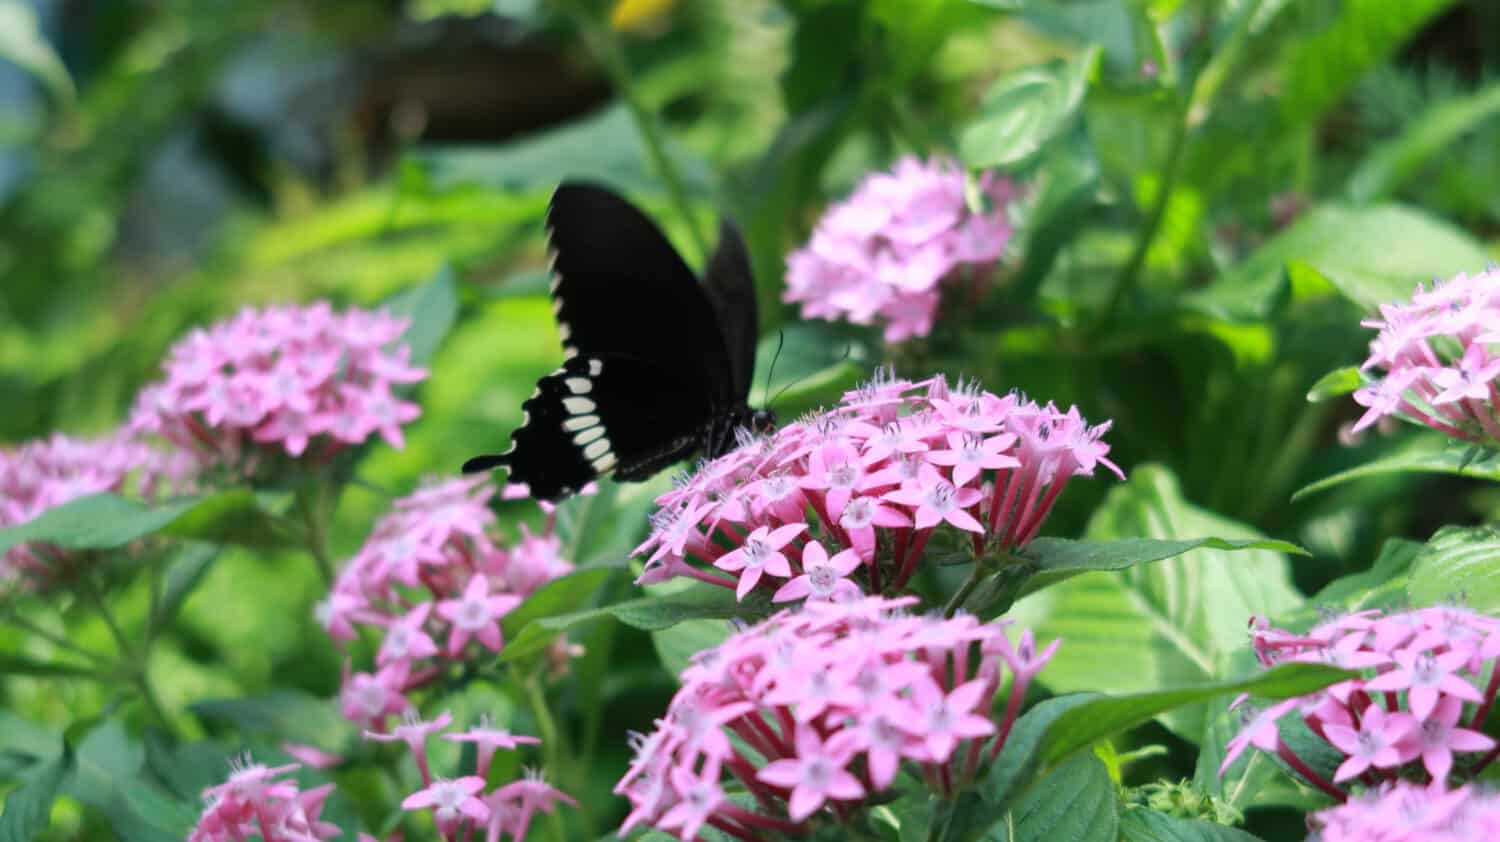 Butterfly Garden at the Changi Airport in Singapore